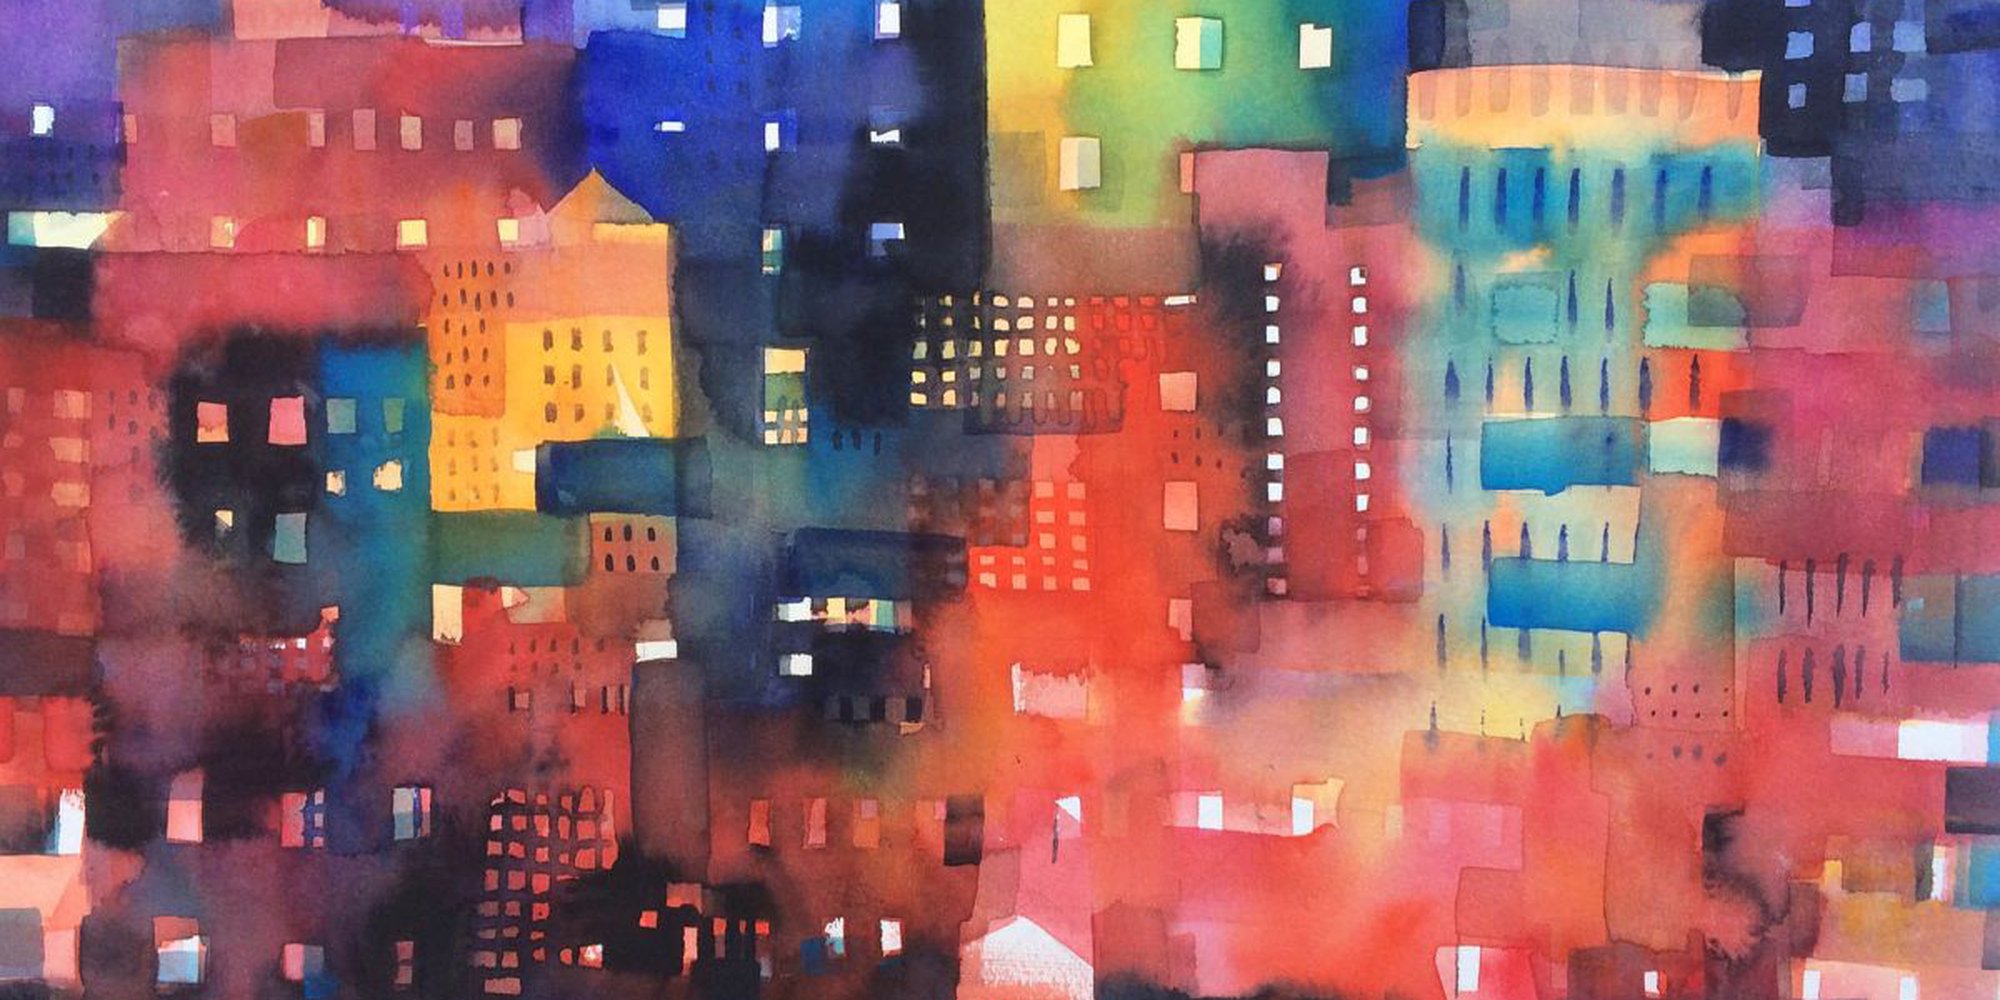 Art of the Day: "Urban landscape 8 - Shadows and lights, 2016" by Alessandro Andreuccetti